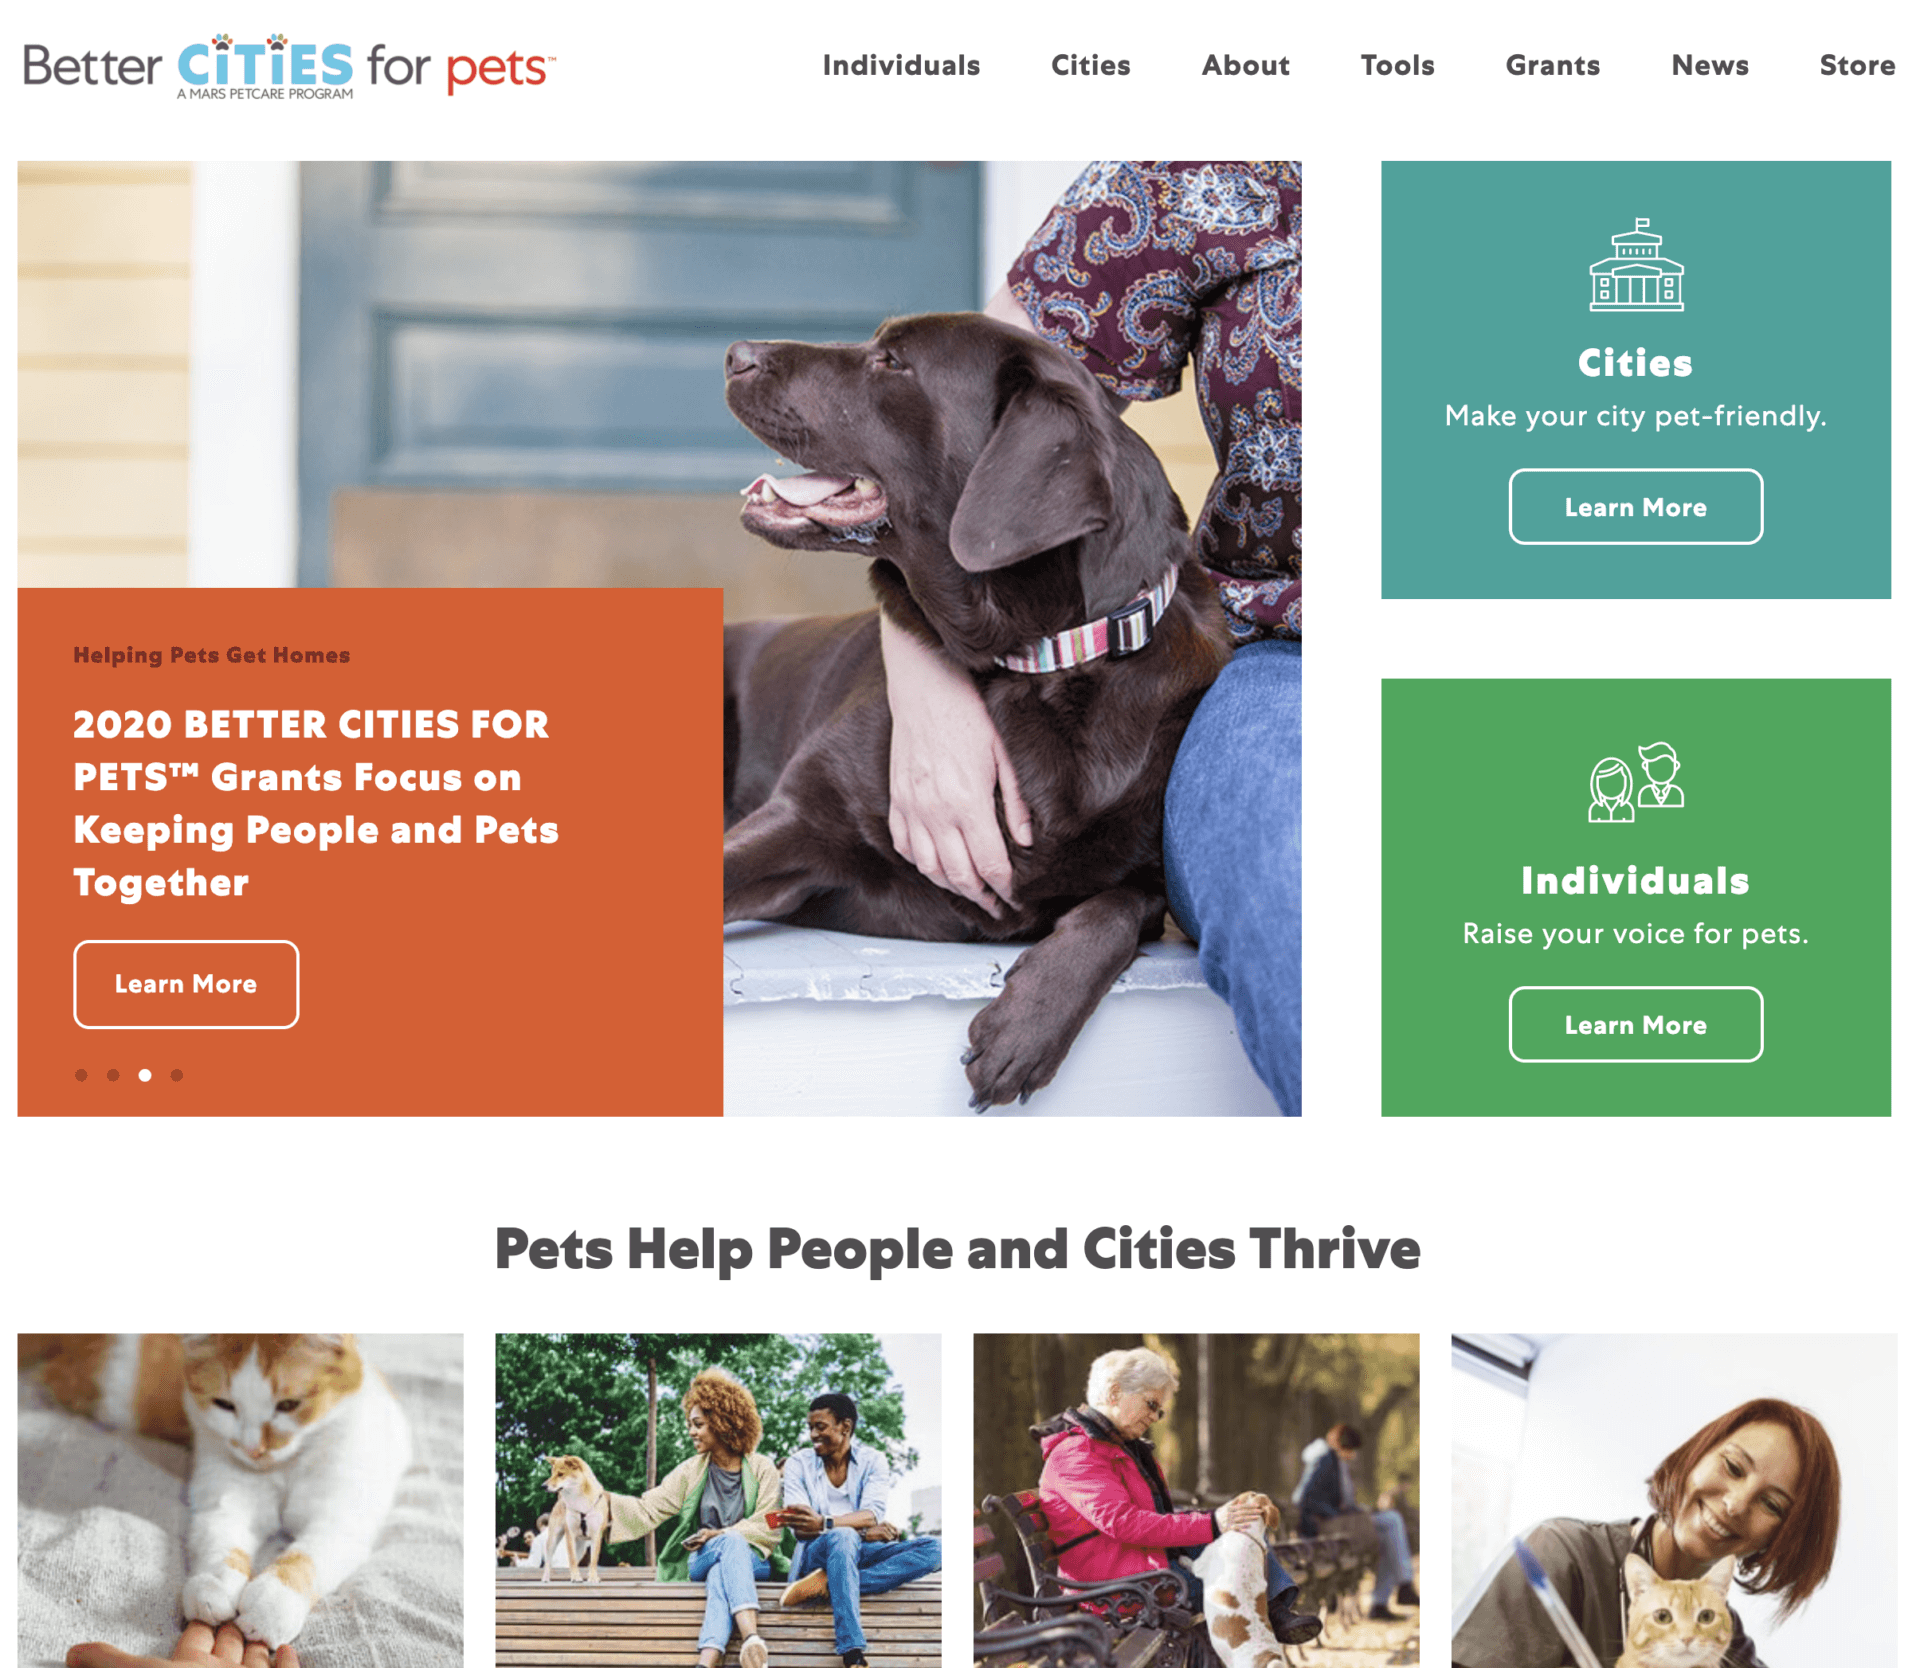 MARS: Better Cities for Pets 